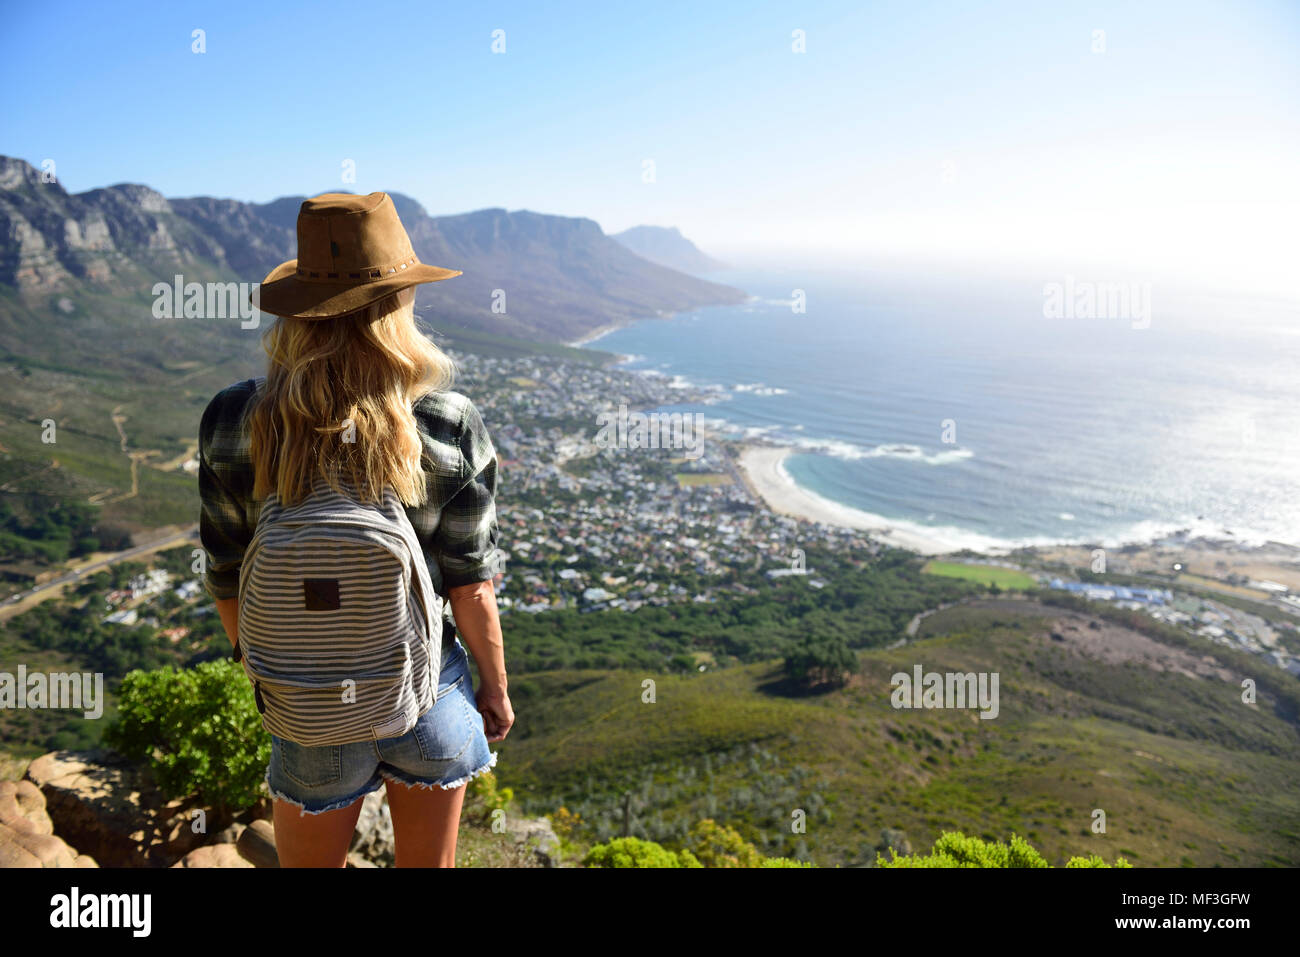 South Africa, Cape Town, woman standing looking at the coast during hiking trip to Lion's Head Stock Photo